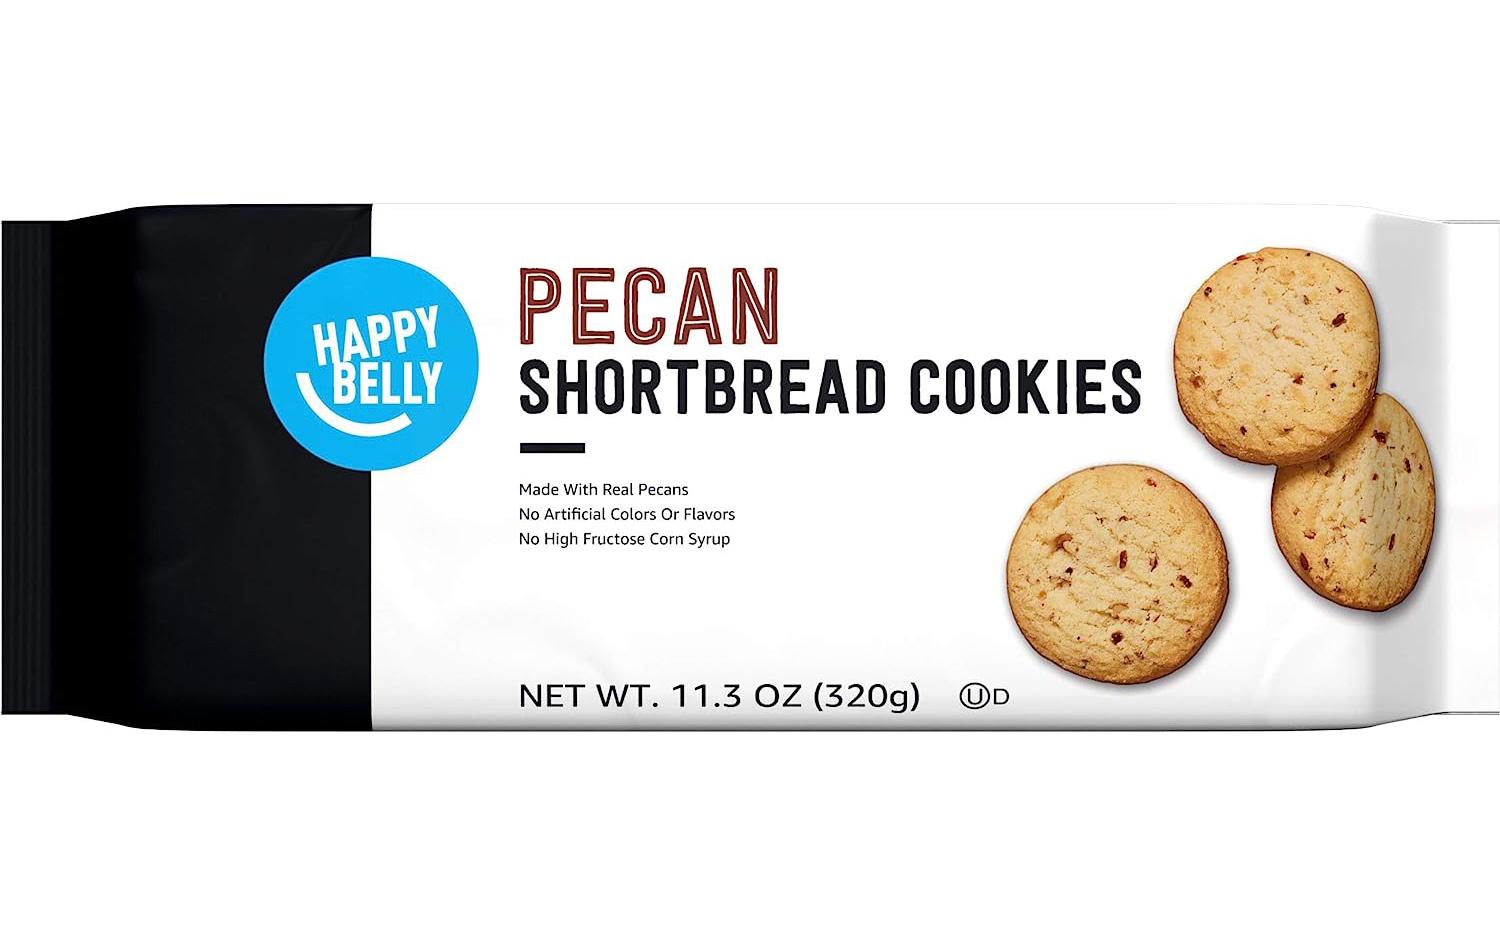 Happy Belly Pecan Shortbread Cookies for $2.37 Shipped